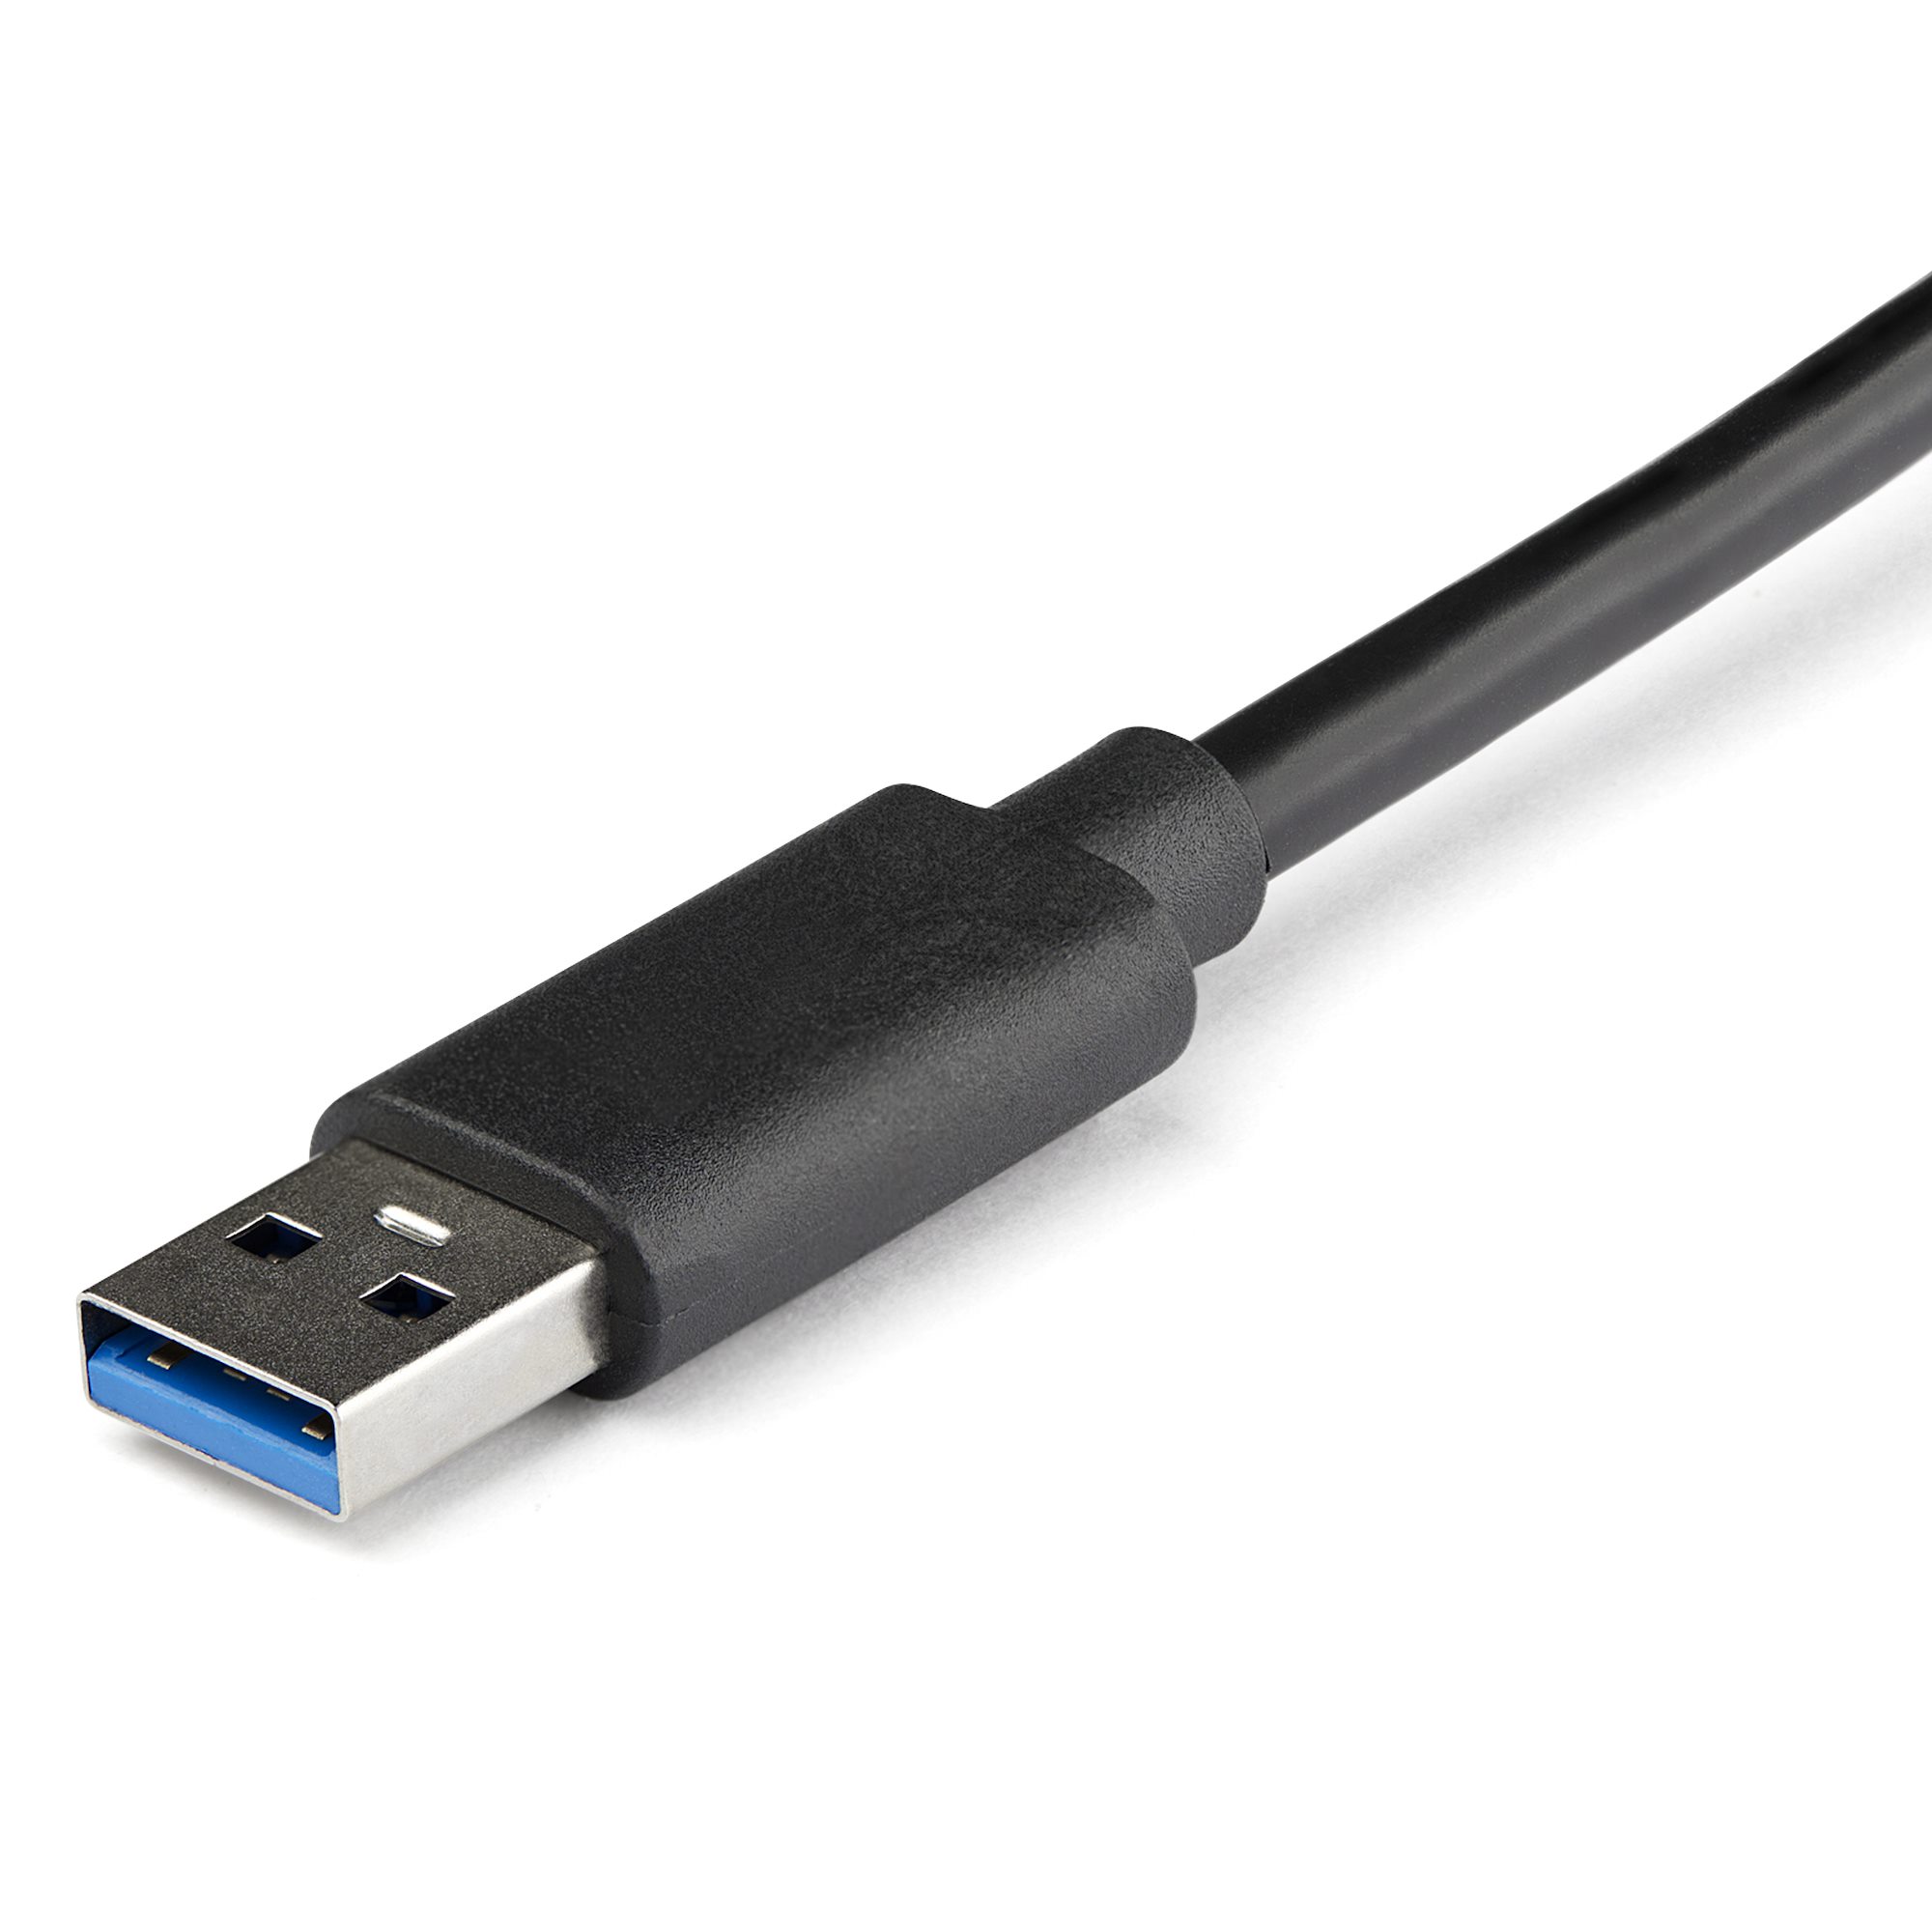 Shop  StarTech.com USB to Ethernet Adapter - USB 3.0 to 10/100